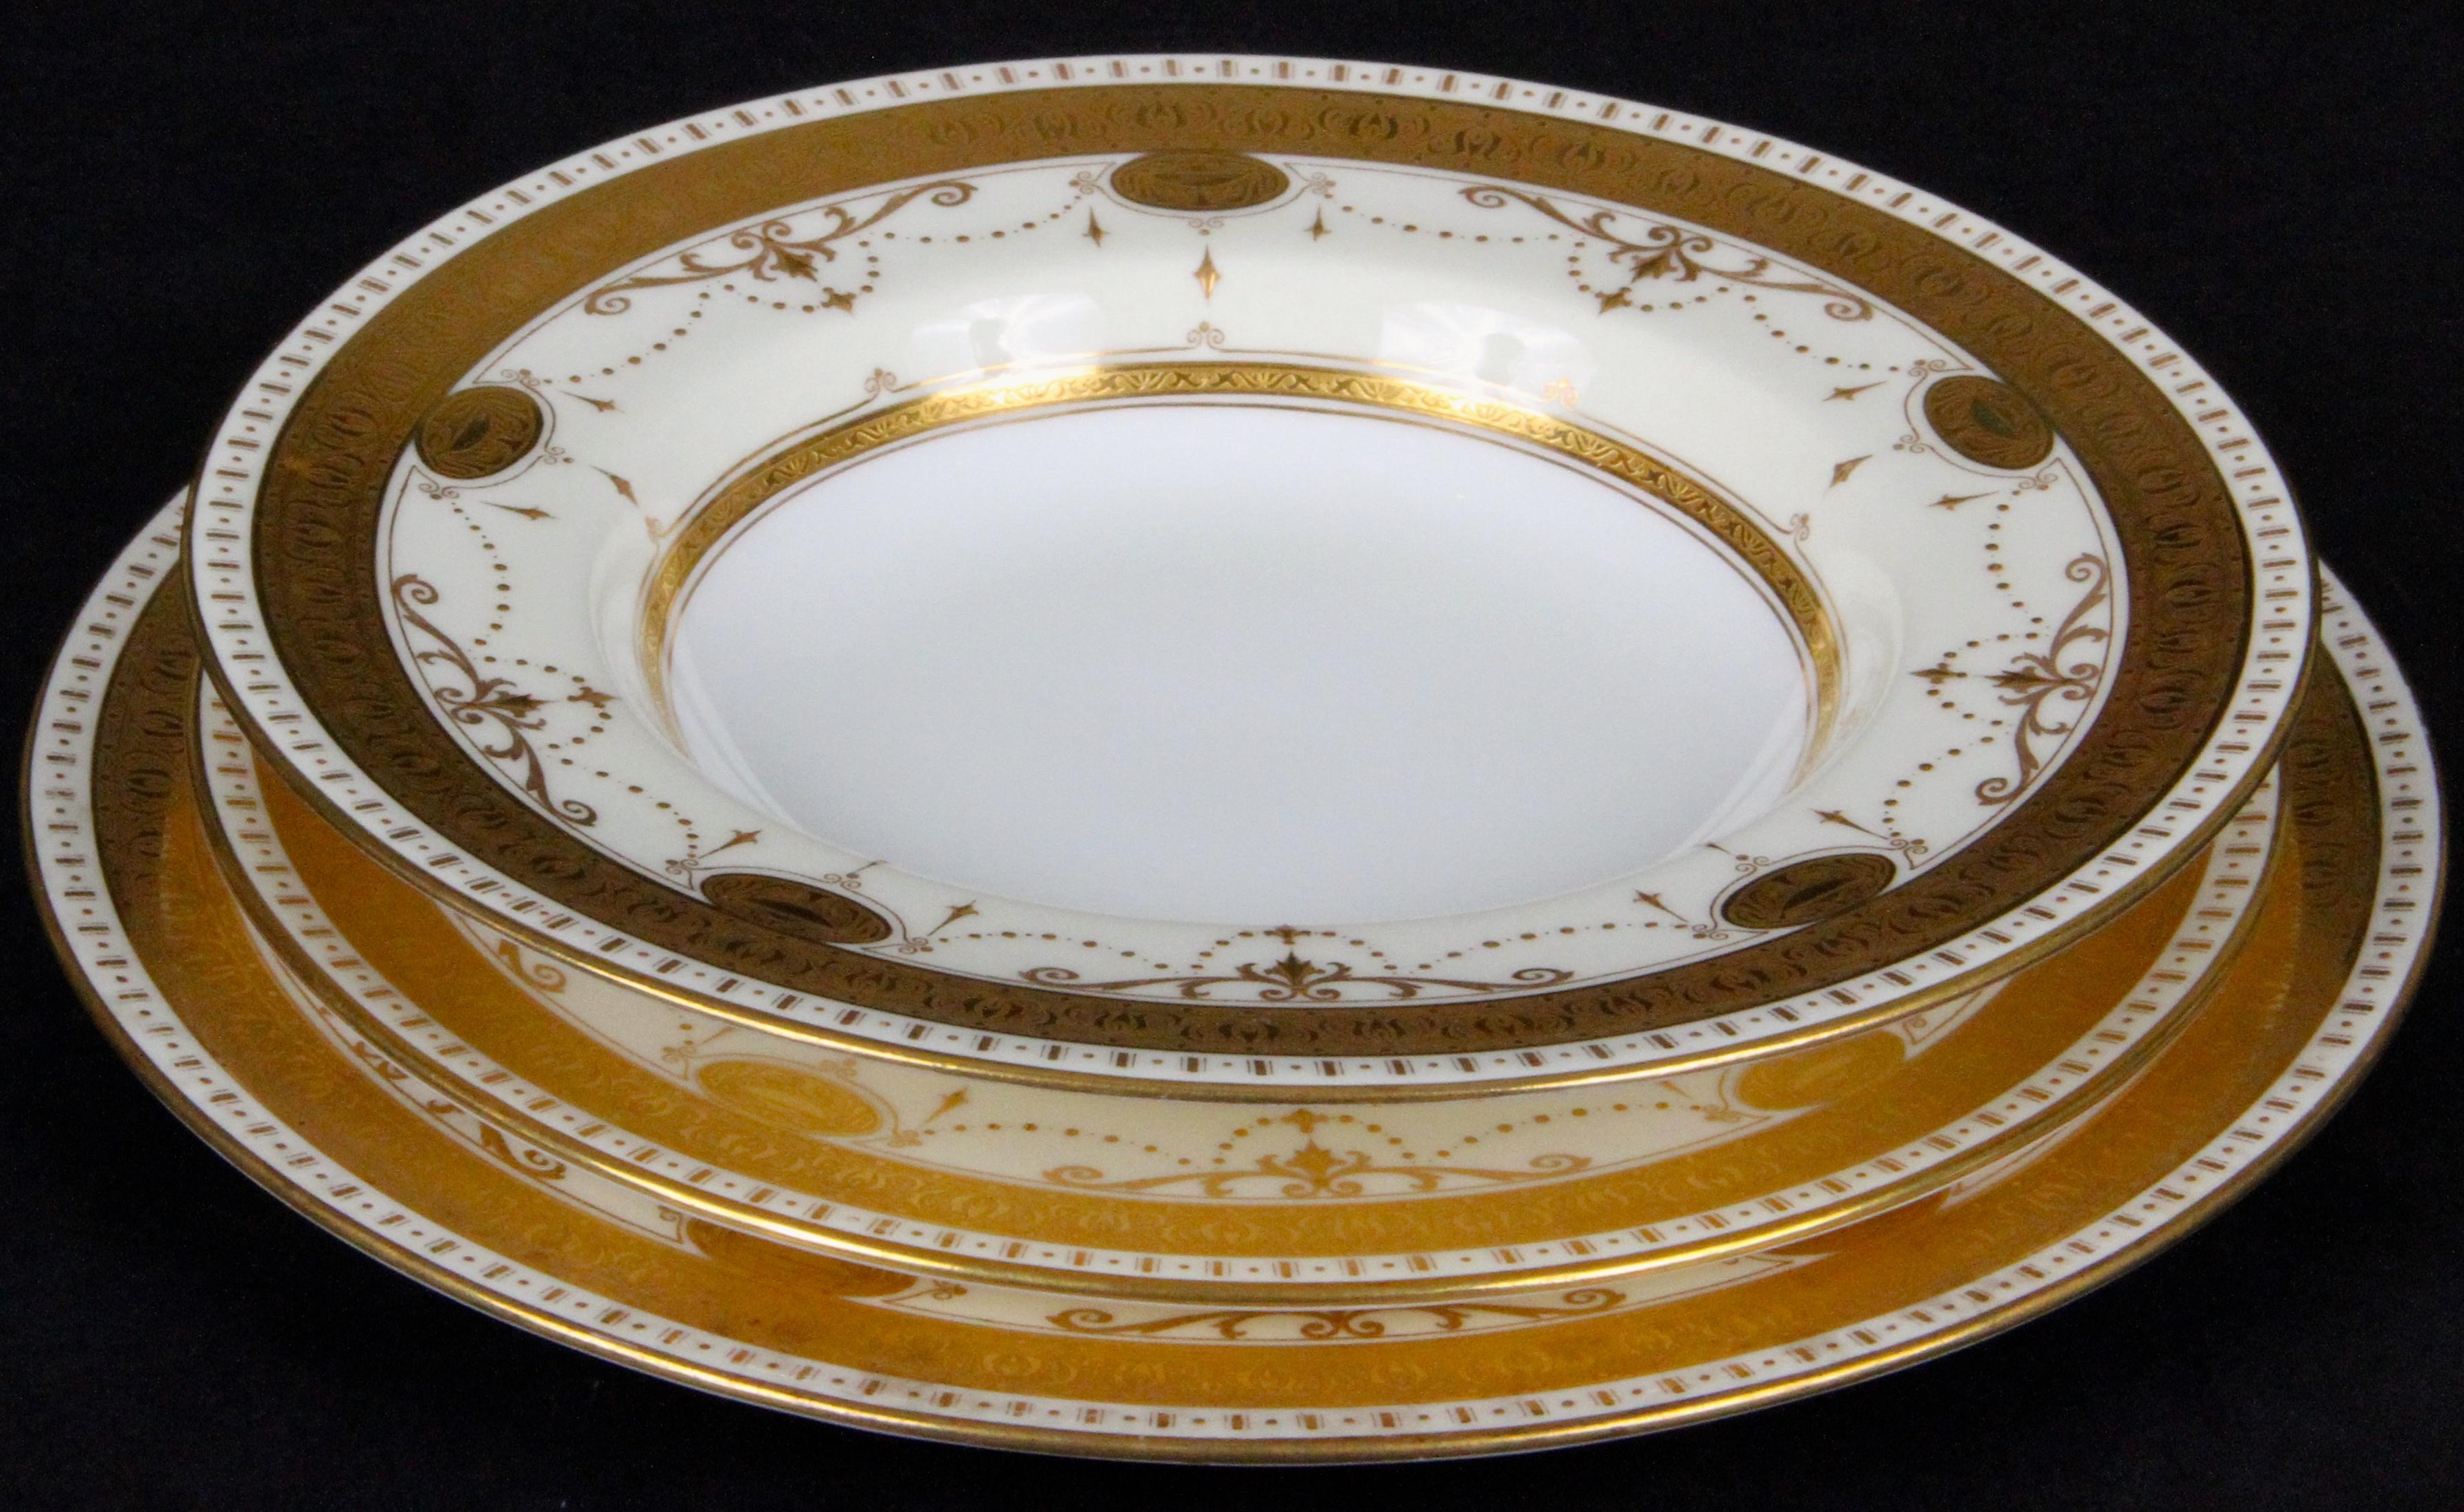 Gold Leaf Service for 8 of Antique Minton for Tiffany Medallion Plates For Sale